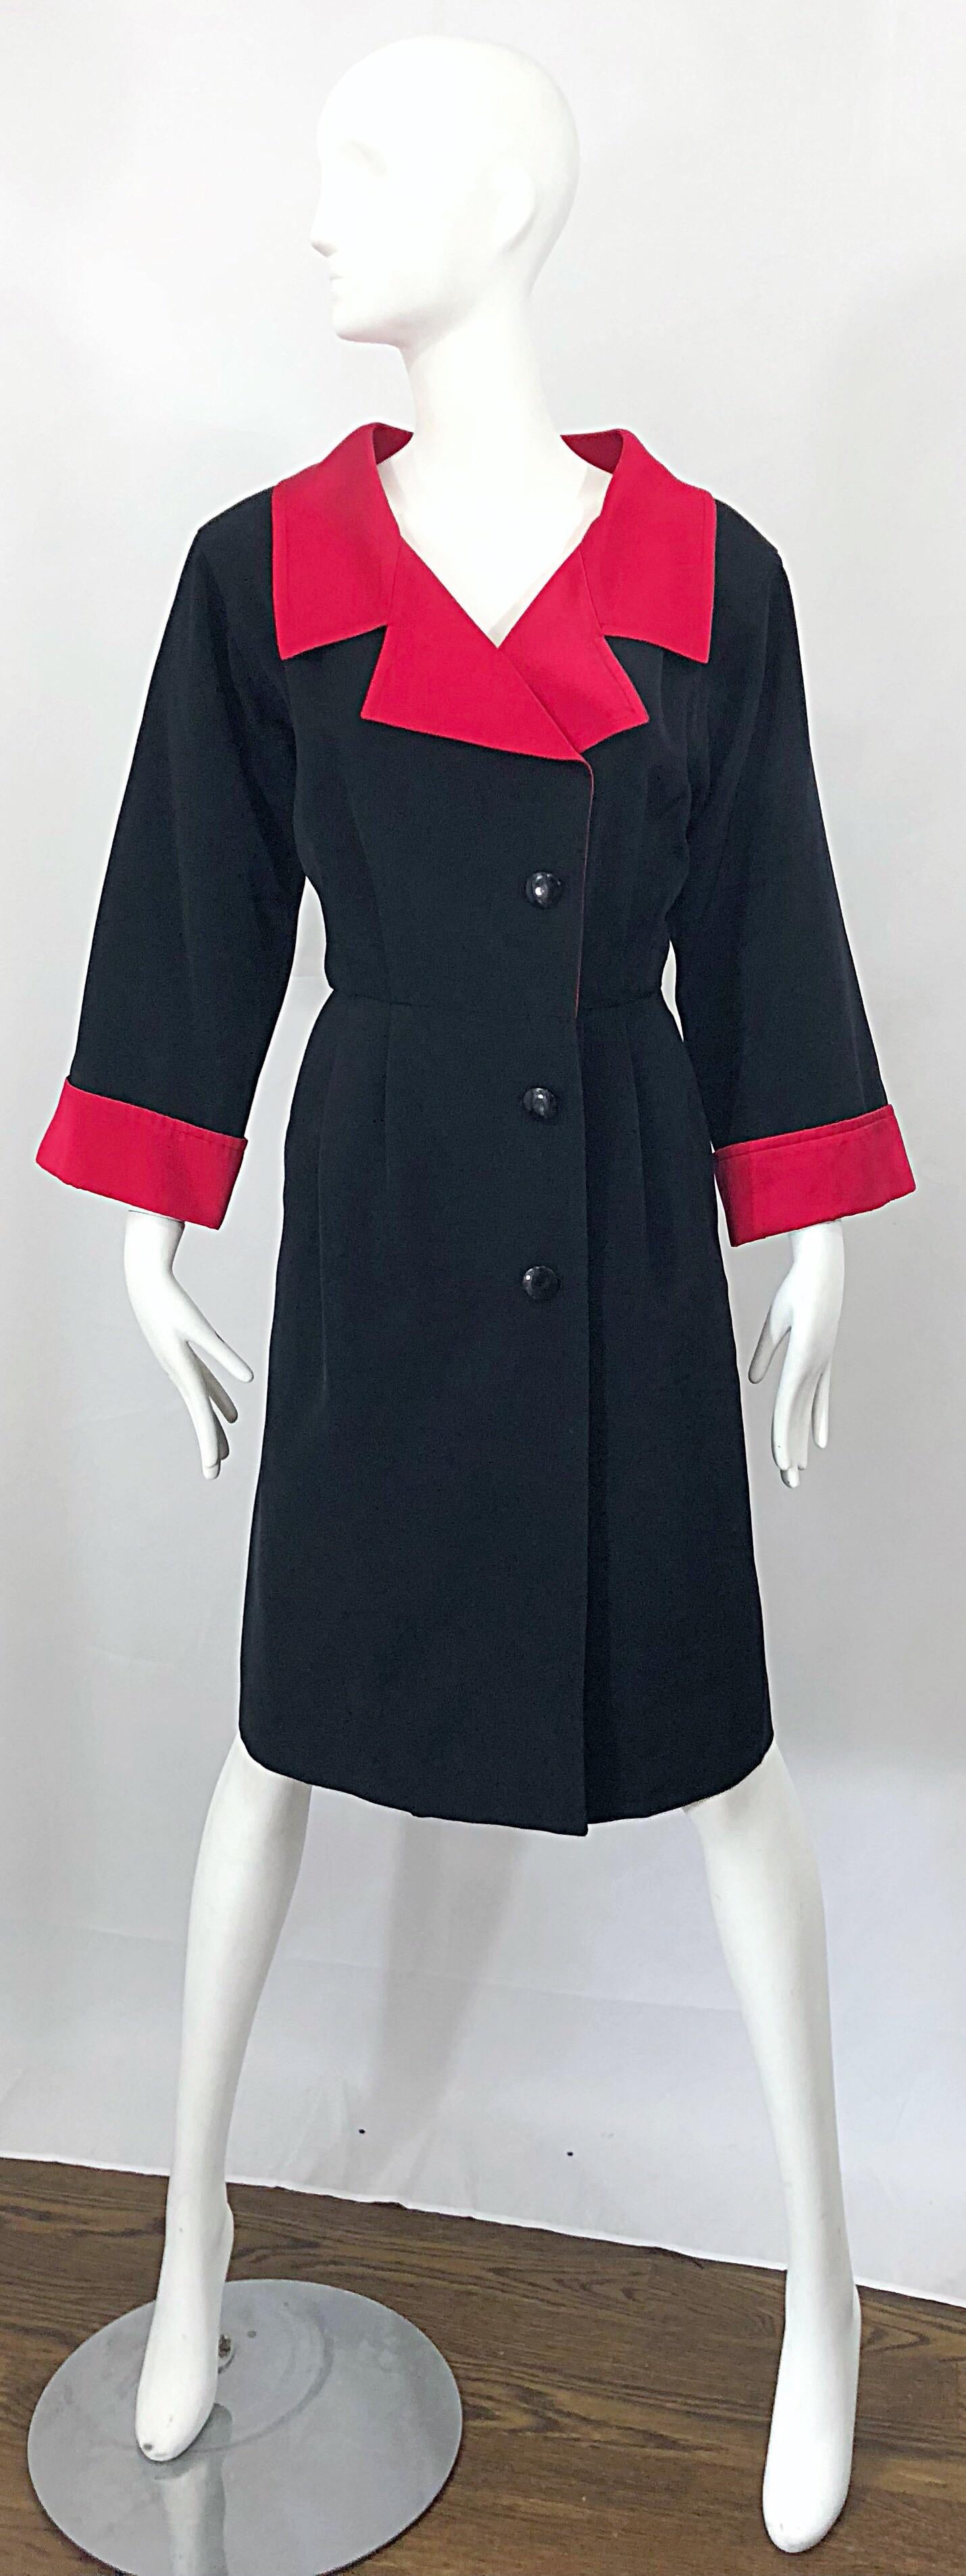 Vintage Yves Saint Laurent Size 42 / 10 Black and Red Silk YSL Dress For Sale 2